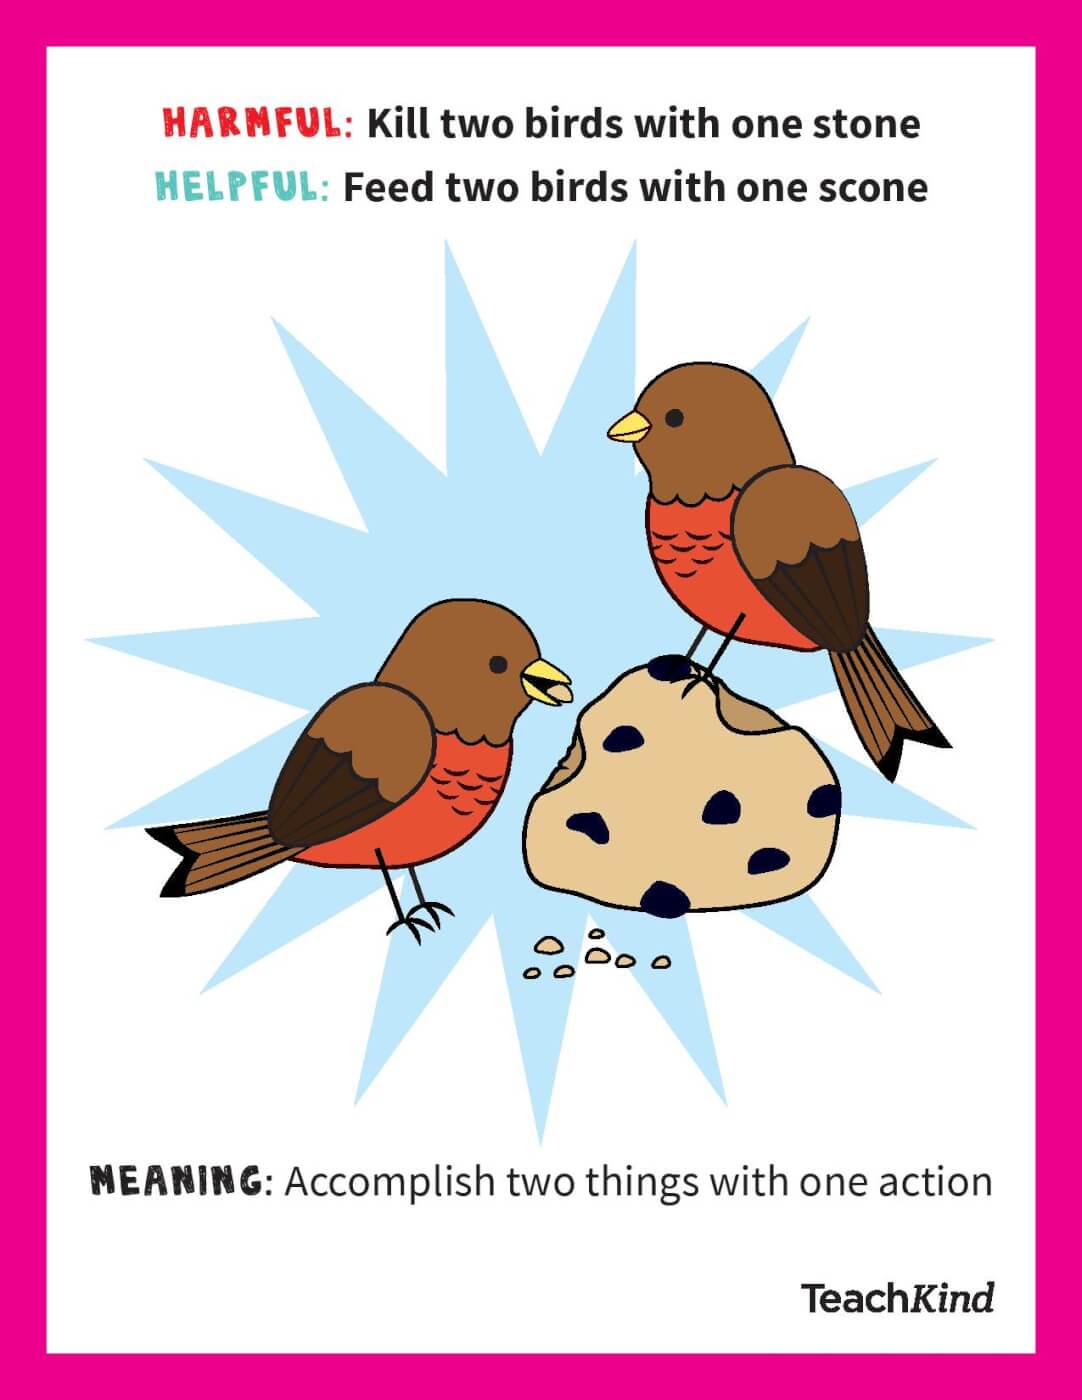 Animal-Friendly Idioms That Your Students Will Love | PETA